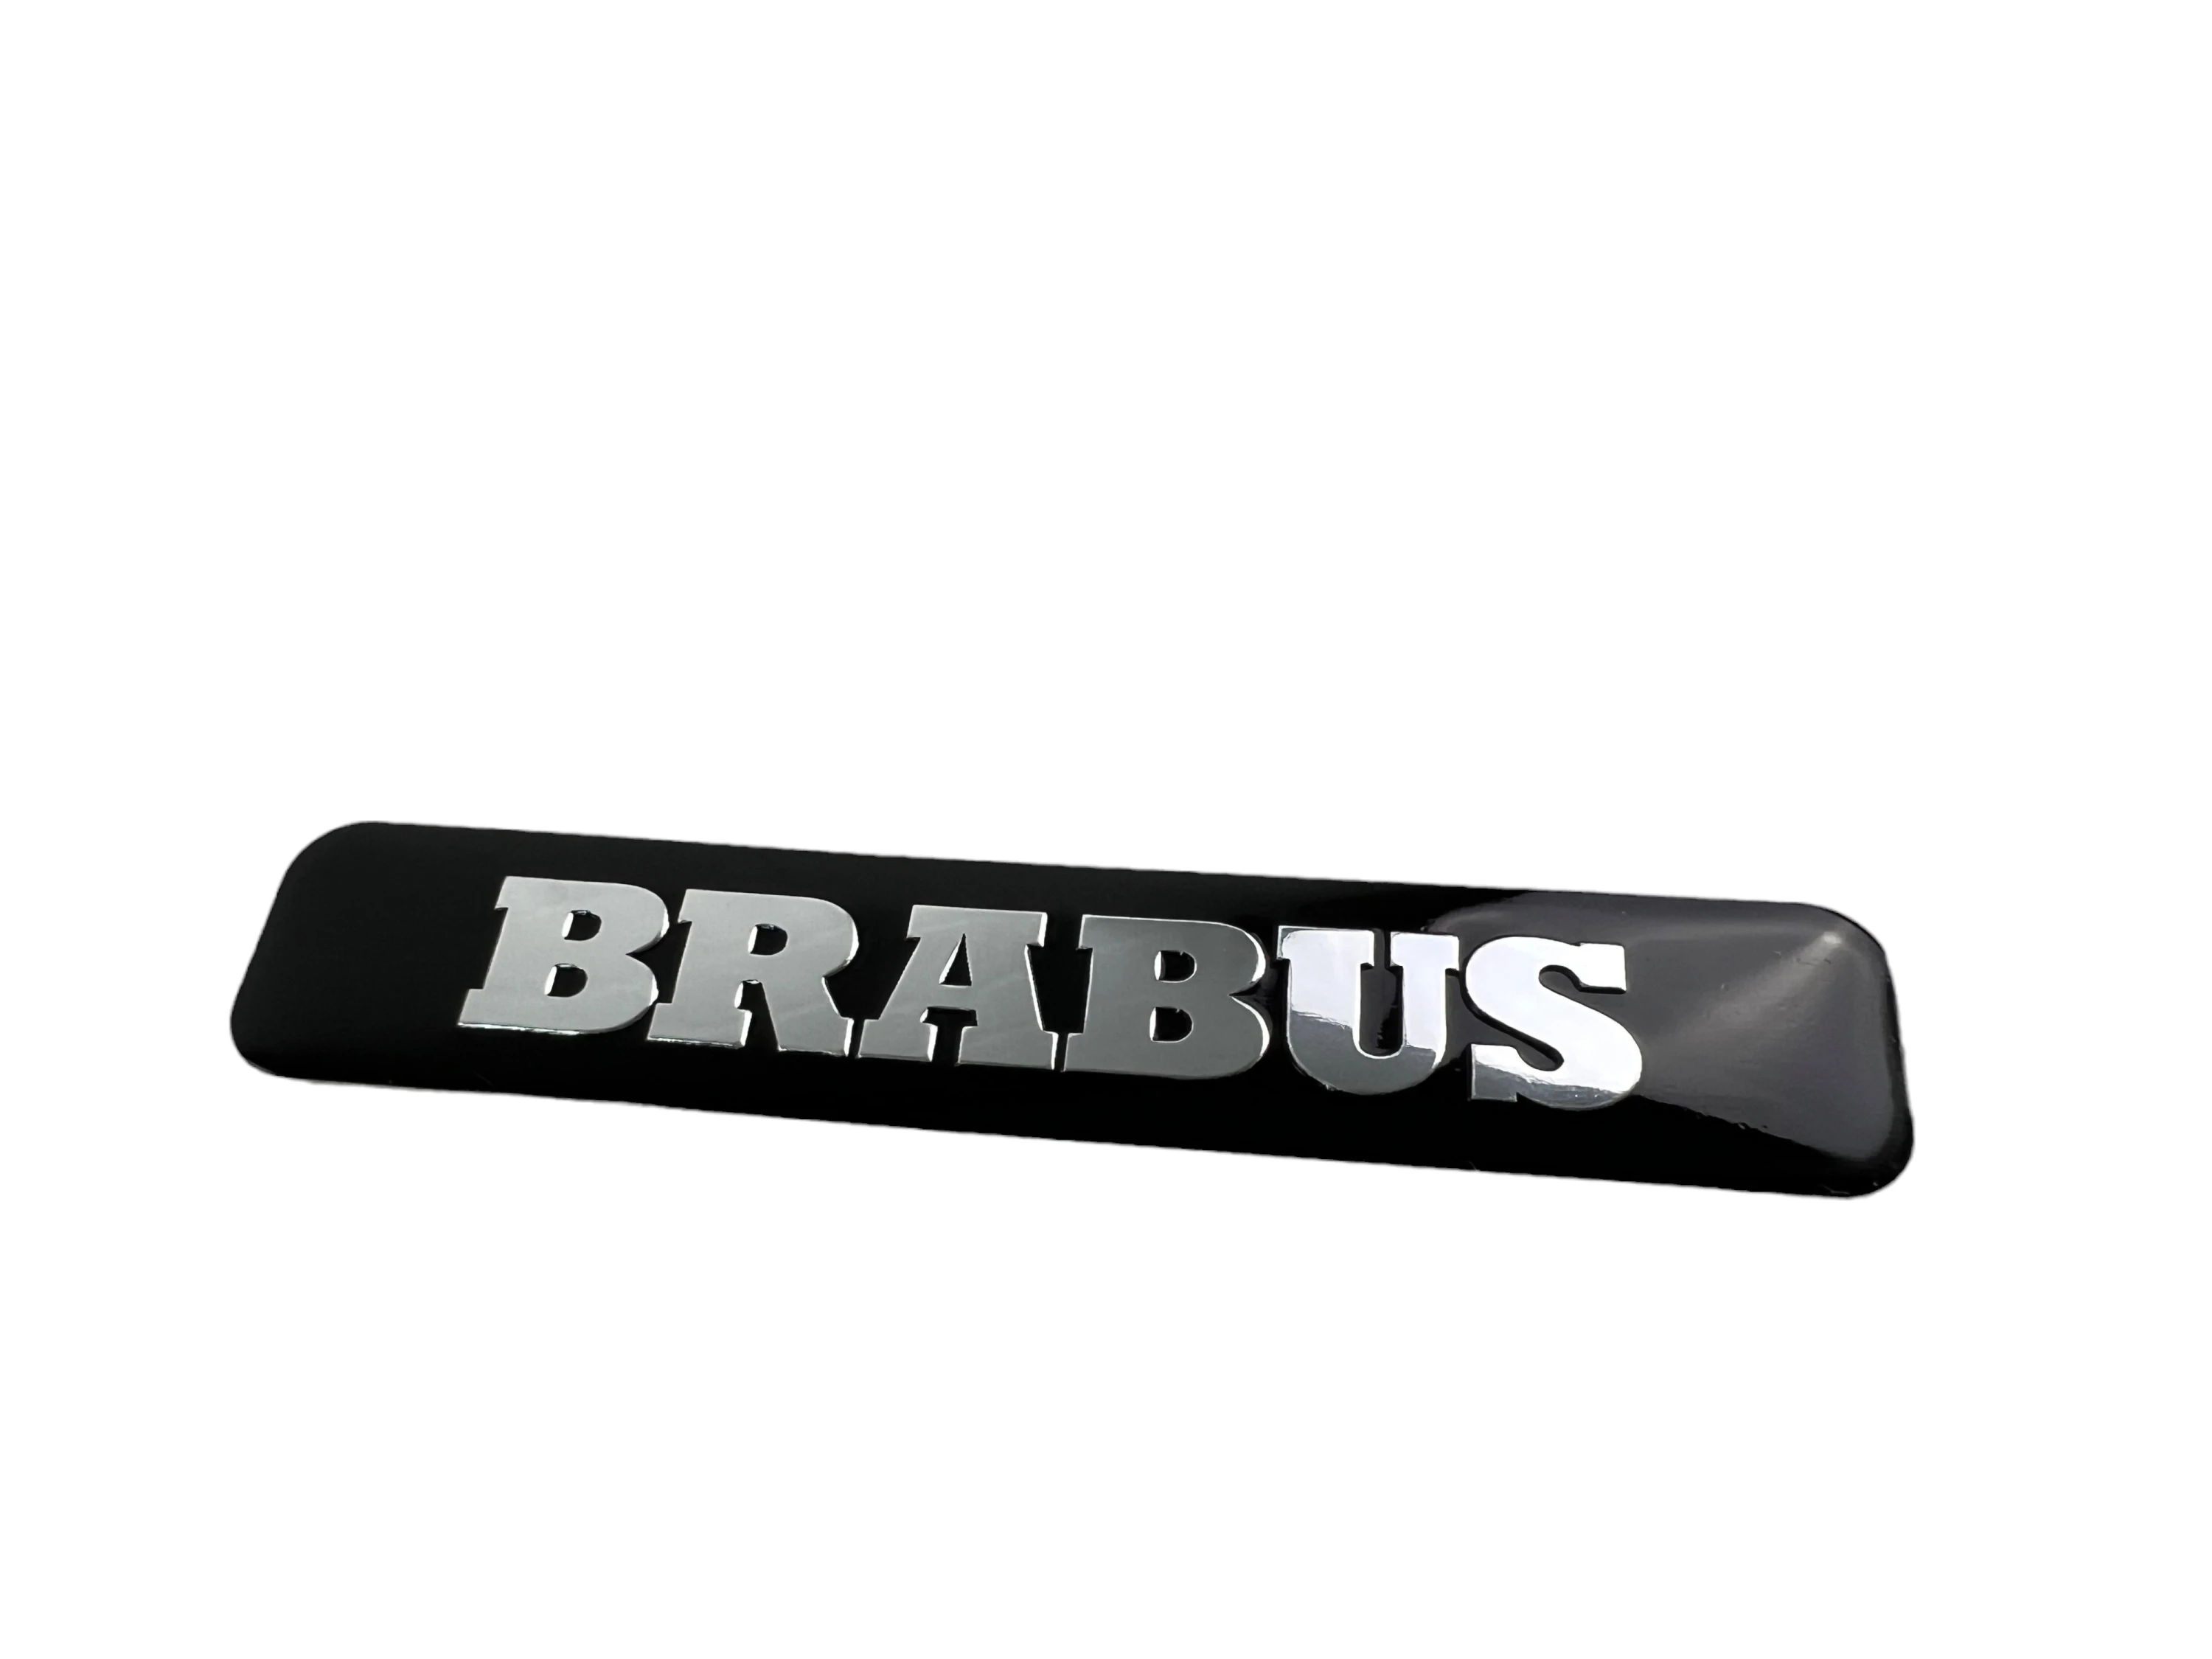 Brabus Self-adhesive Emblem / Top Quality Silicone Logo Sticker / Badge for  Laptop, Phone, Glass, Car Interior, Iphone, Ipod, Monitor, Door -   Canada